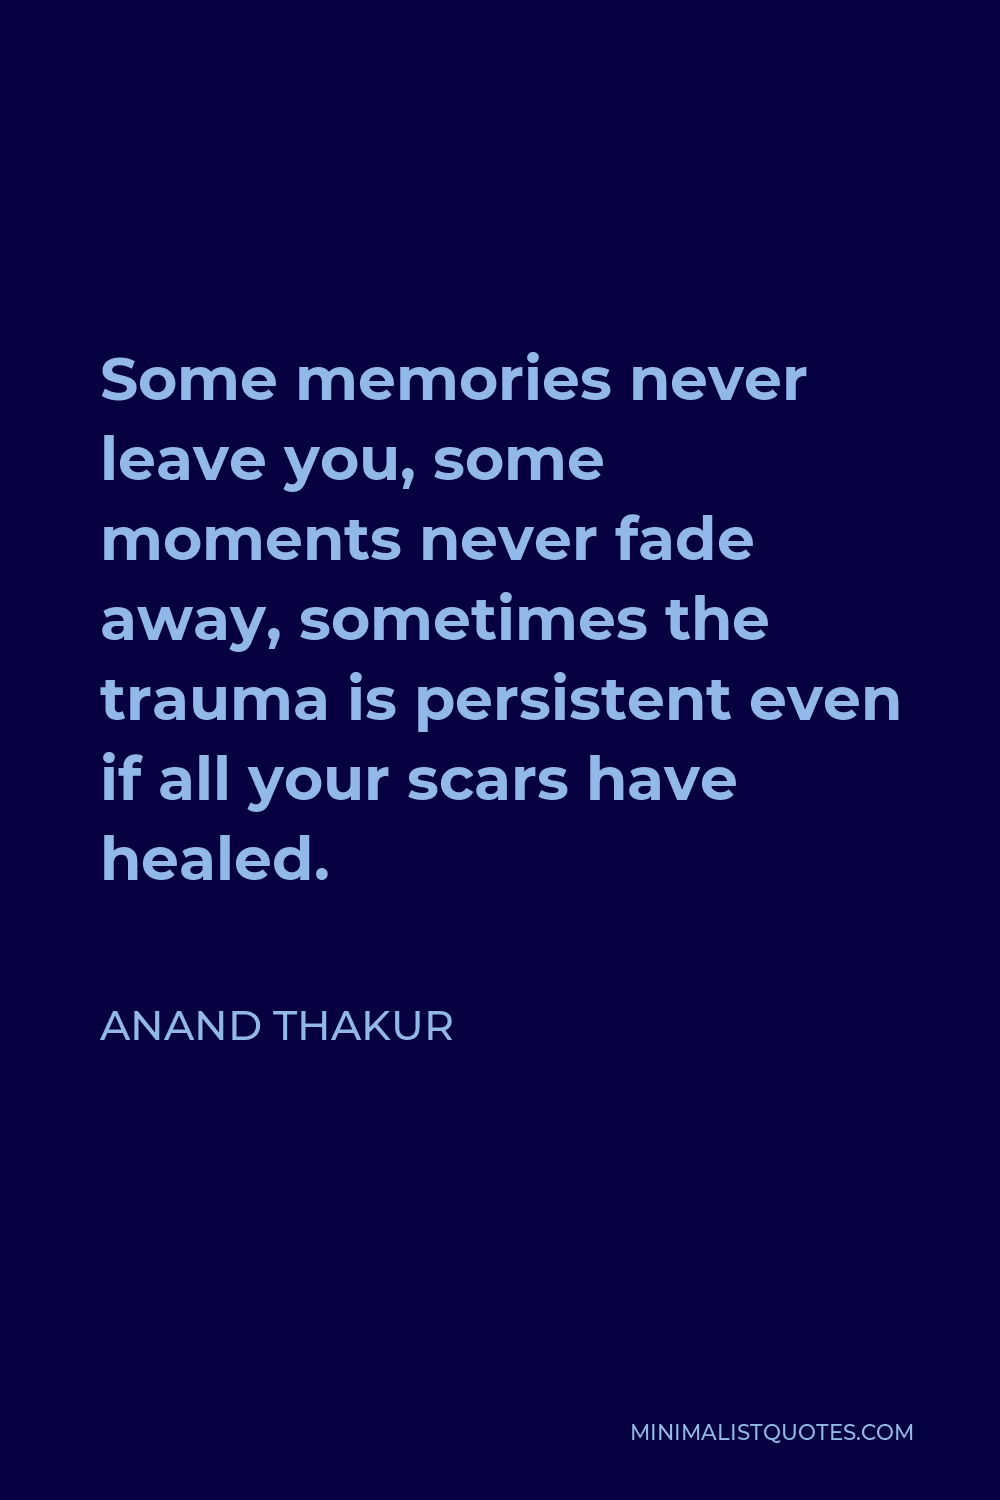 Anand Thakur Quote - Some memories never leave you, some moments never fade away, sometimes the trauma is persistent even if all your scars have healed.